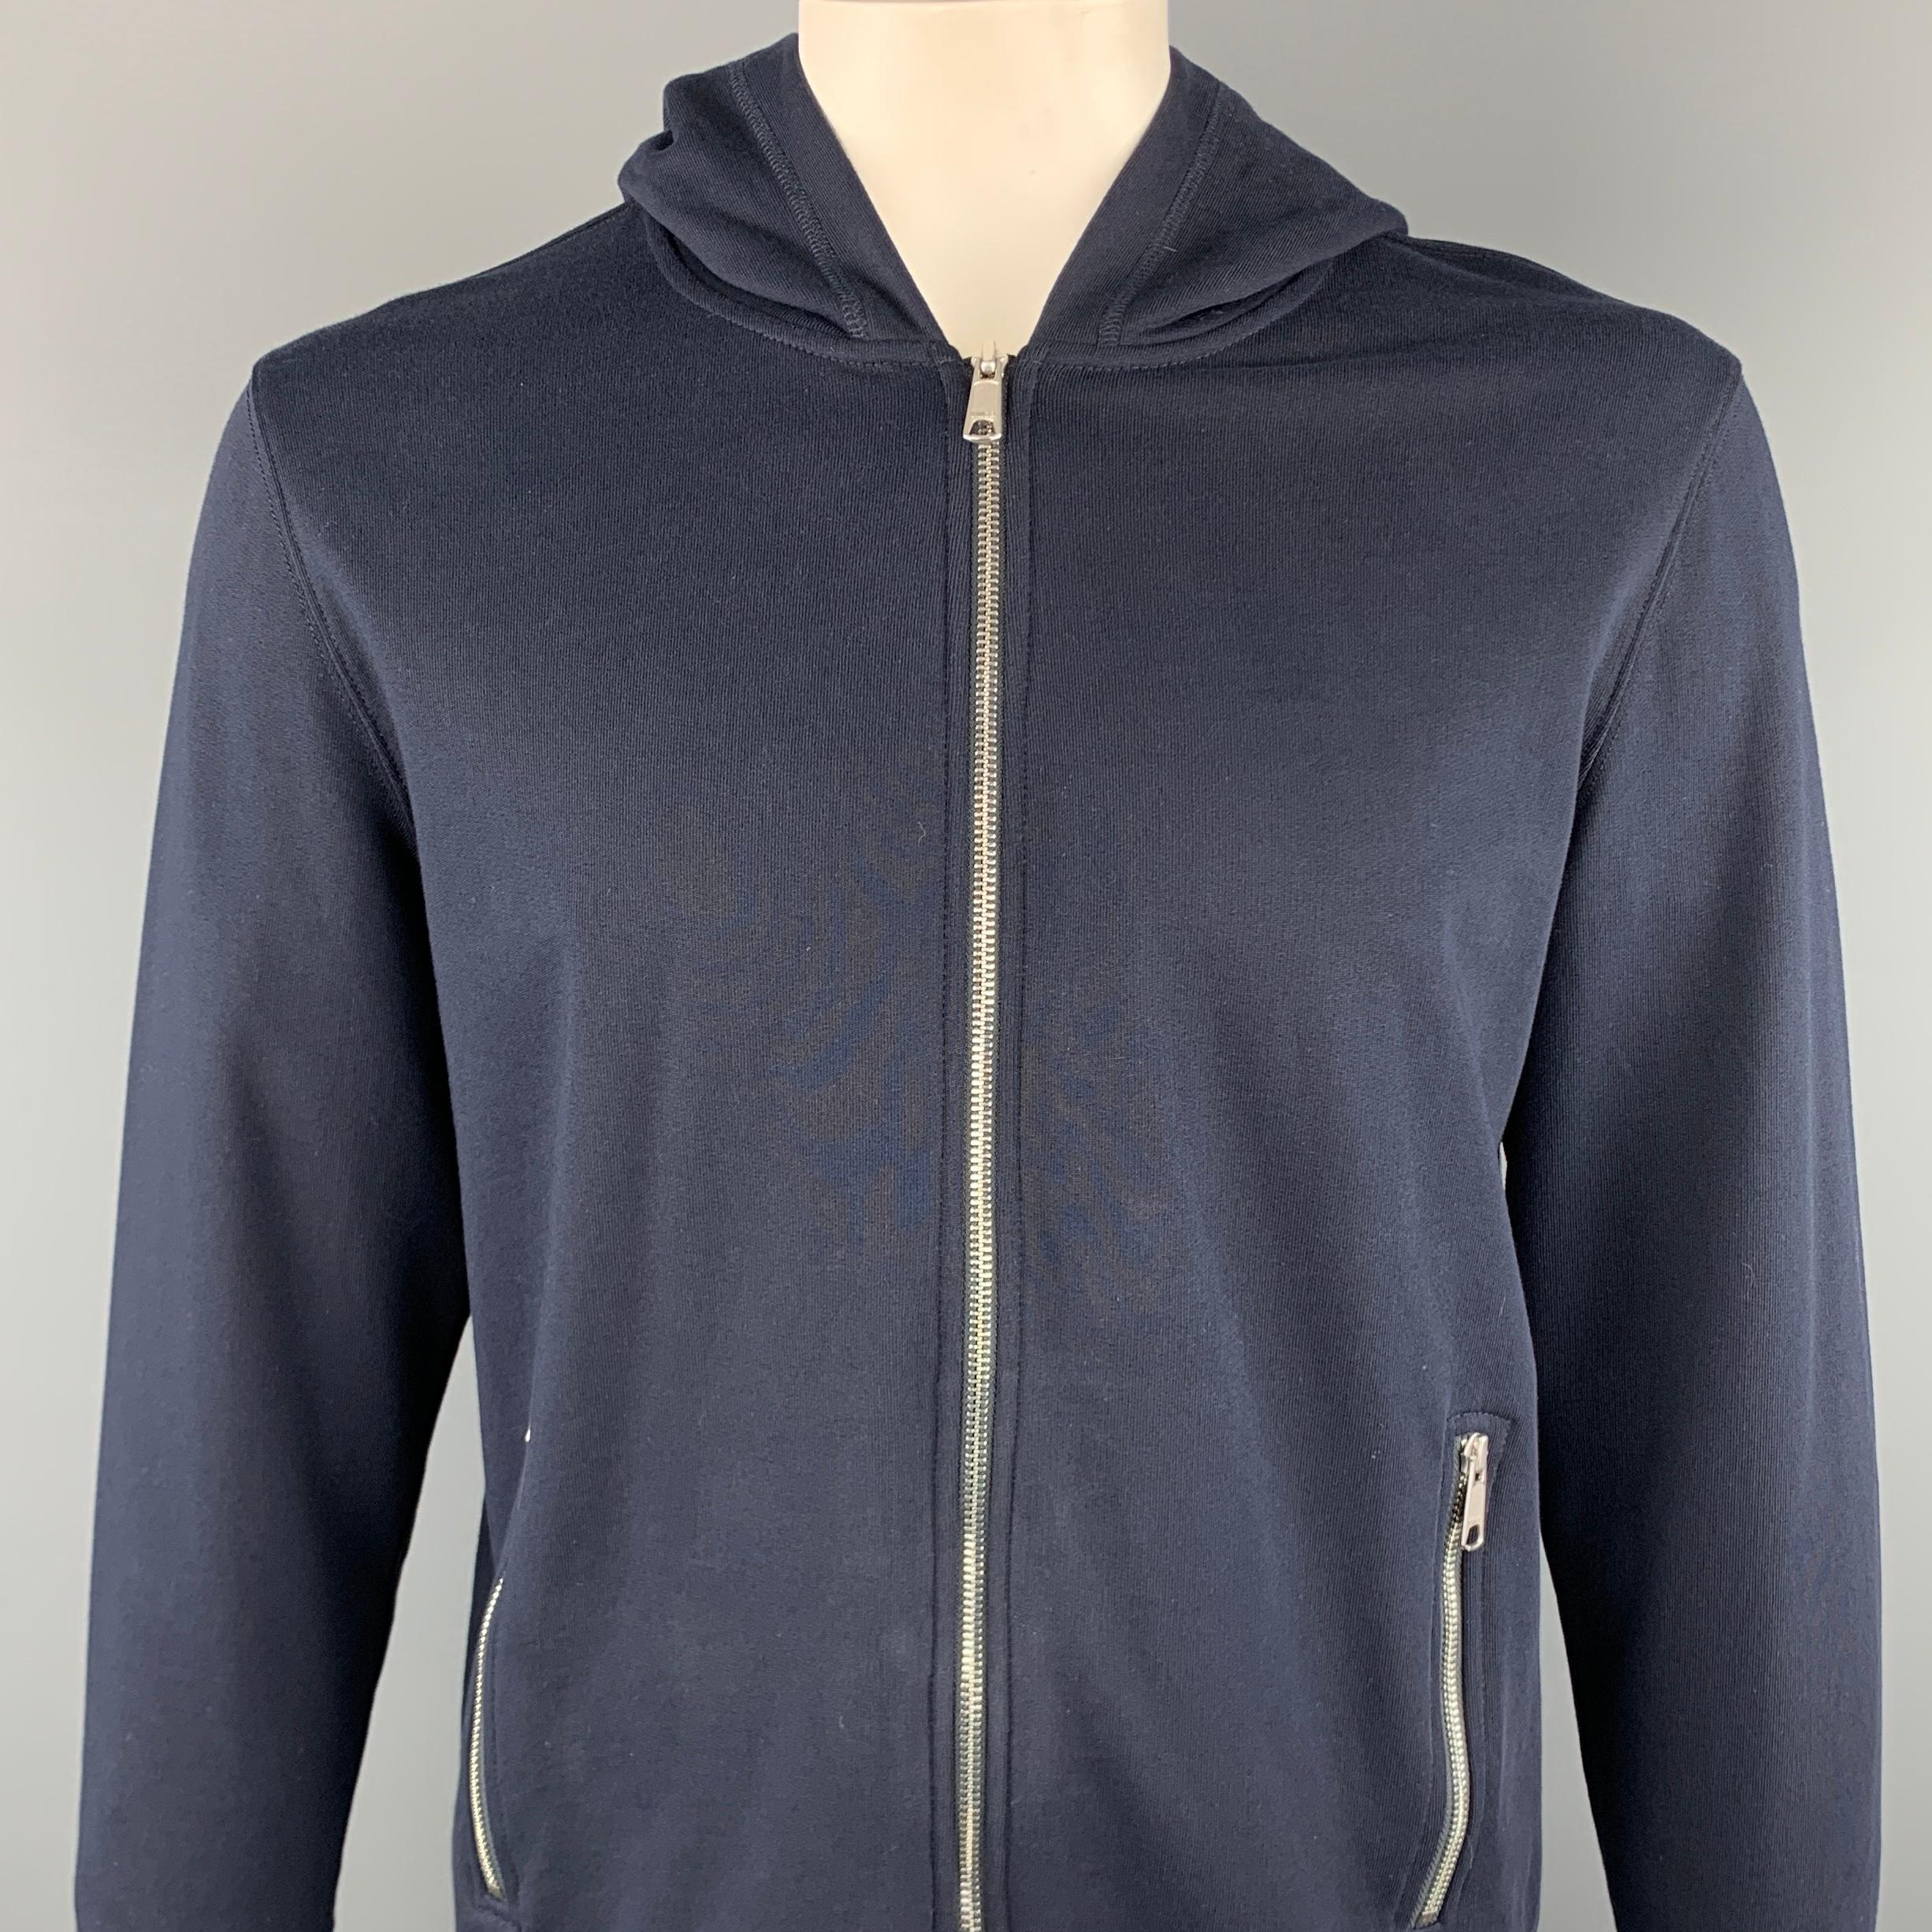 VINCE jacket comes in a navy cotton featuring a hooded style, zipper pockets, and a full zip closure. 

Excellent Pre-Owned Condition.
Marked: L

Measurements:

Shoulder: 20 in.
Chest: 46 in. 
Sleeve: 28 in. 
Length: 27 in. 